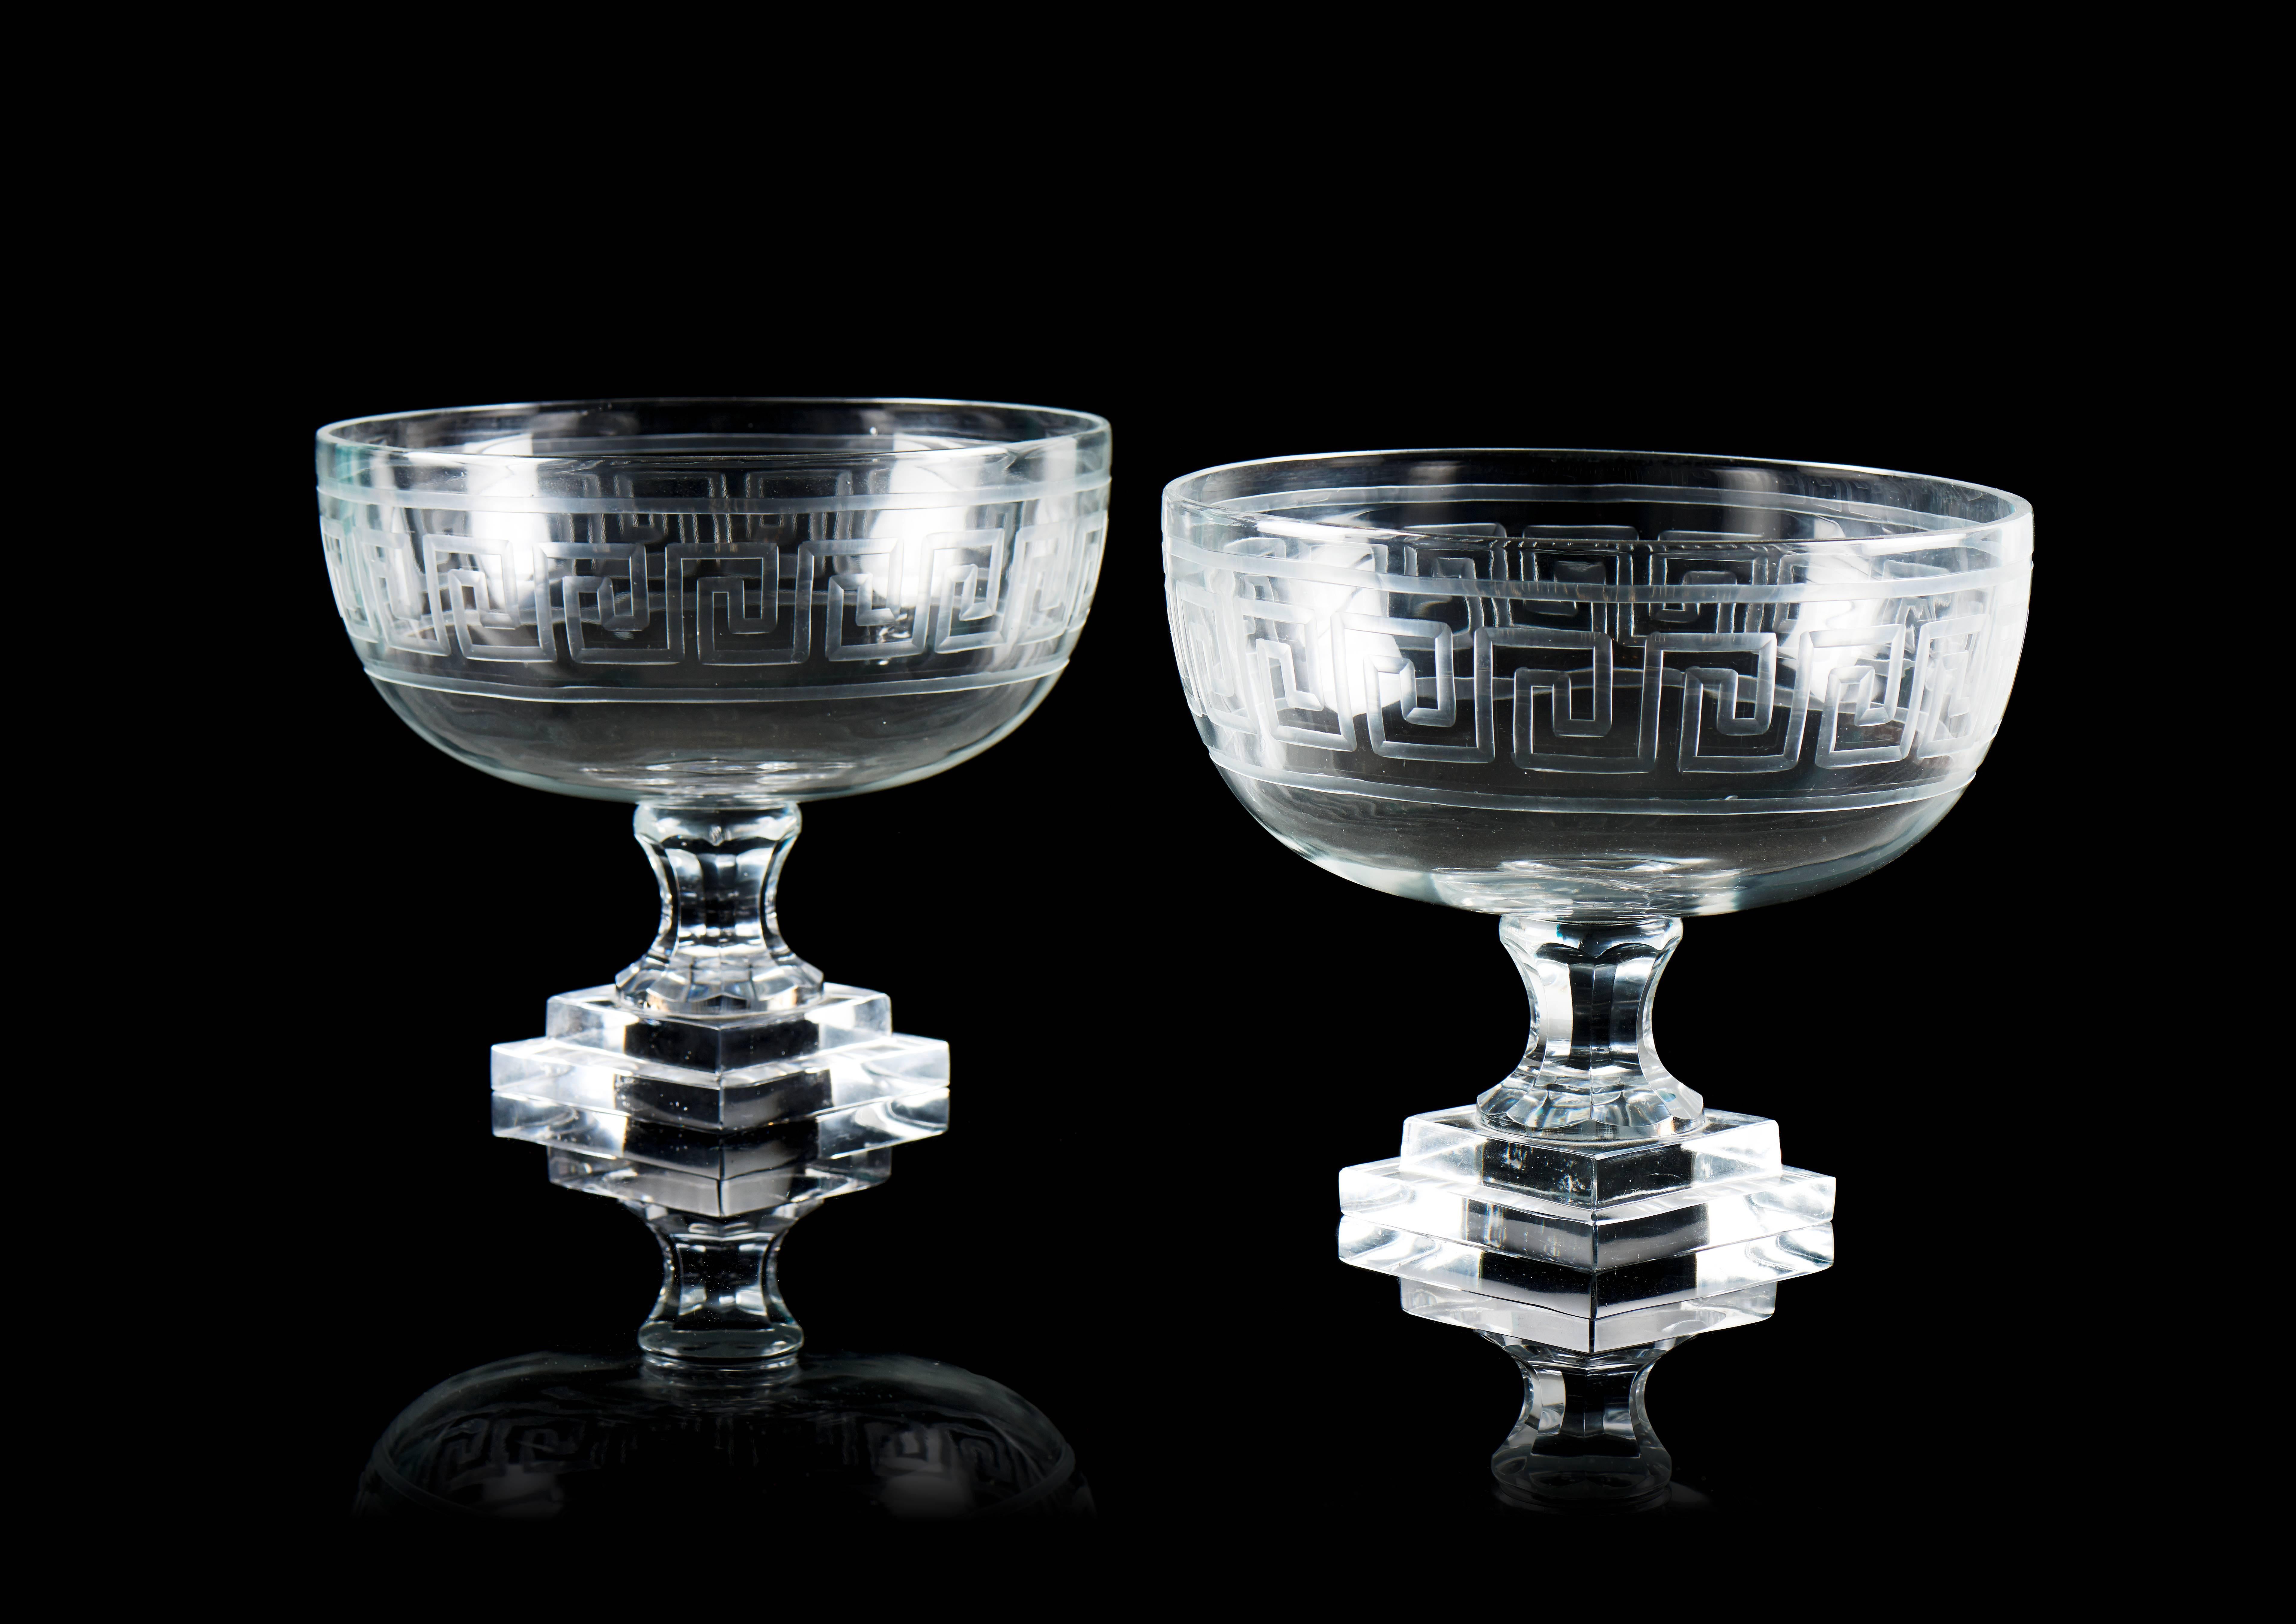 For sale on 1stdibs a pair of crystal bowls with pedestal decorated with neoclassical motifs. These bowls are in perfect condition and the crystal is not restored in any place. They can be either used as decorative pieces or as beautiful serving